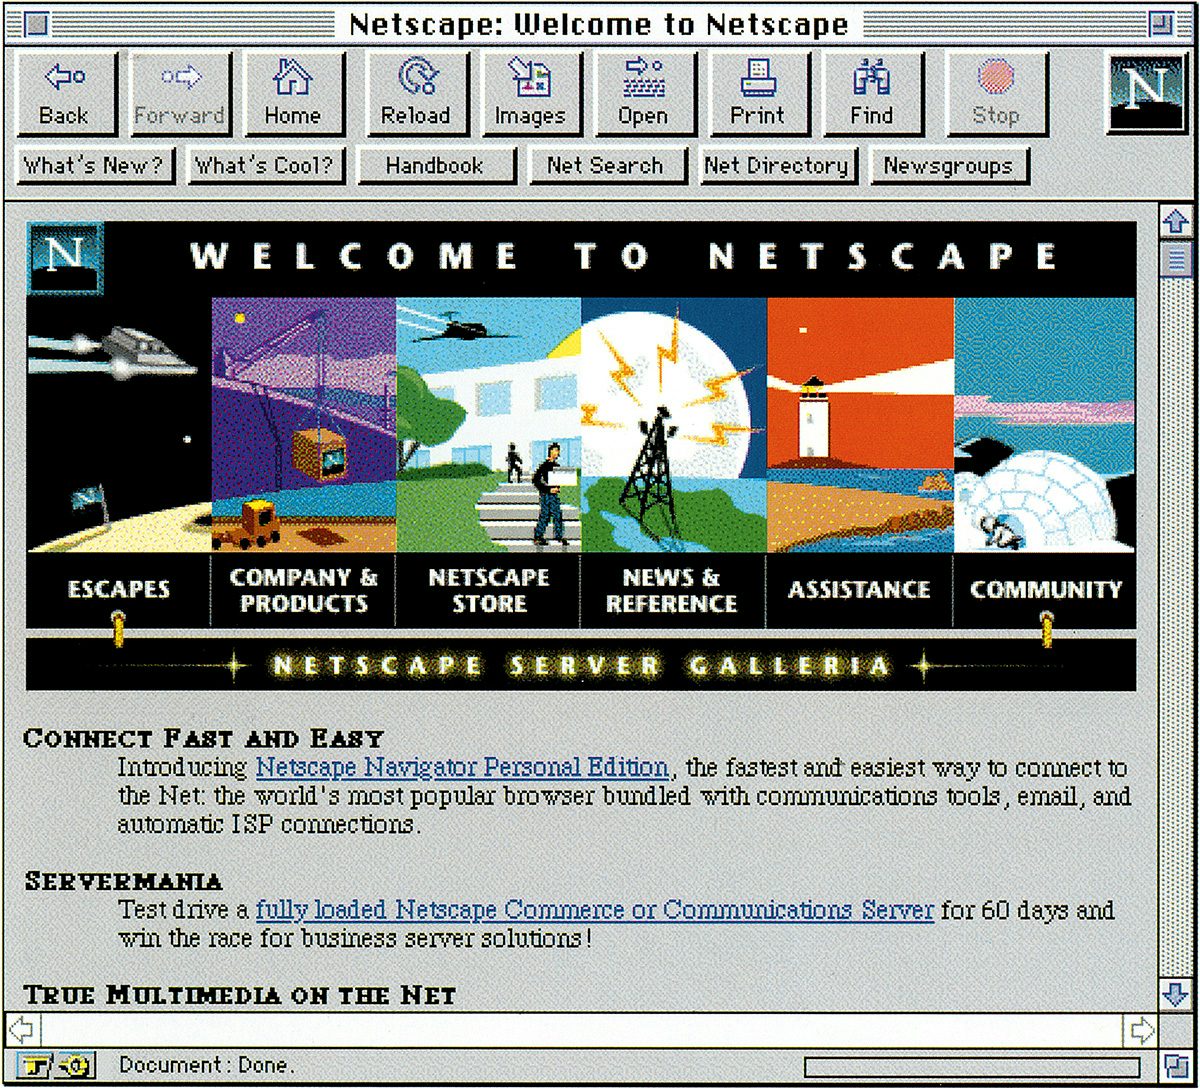 Image shows the user interface of the browser Netscape